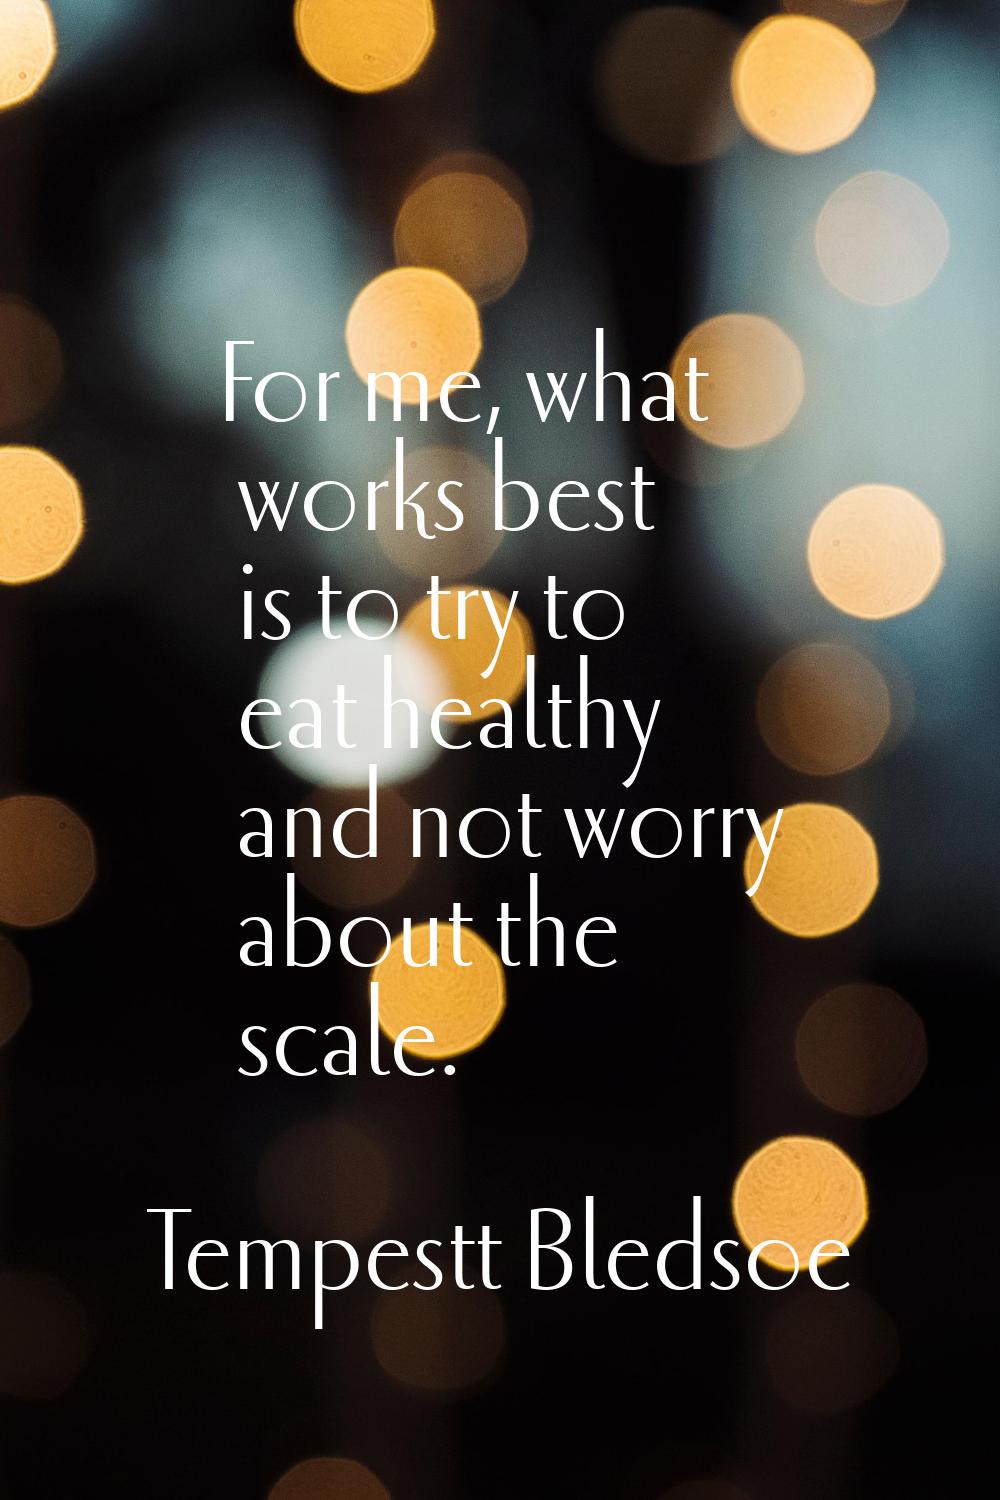 For me, what works best is to try to eat healthy and not worry about the scale.